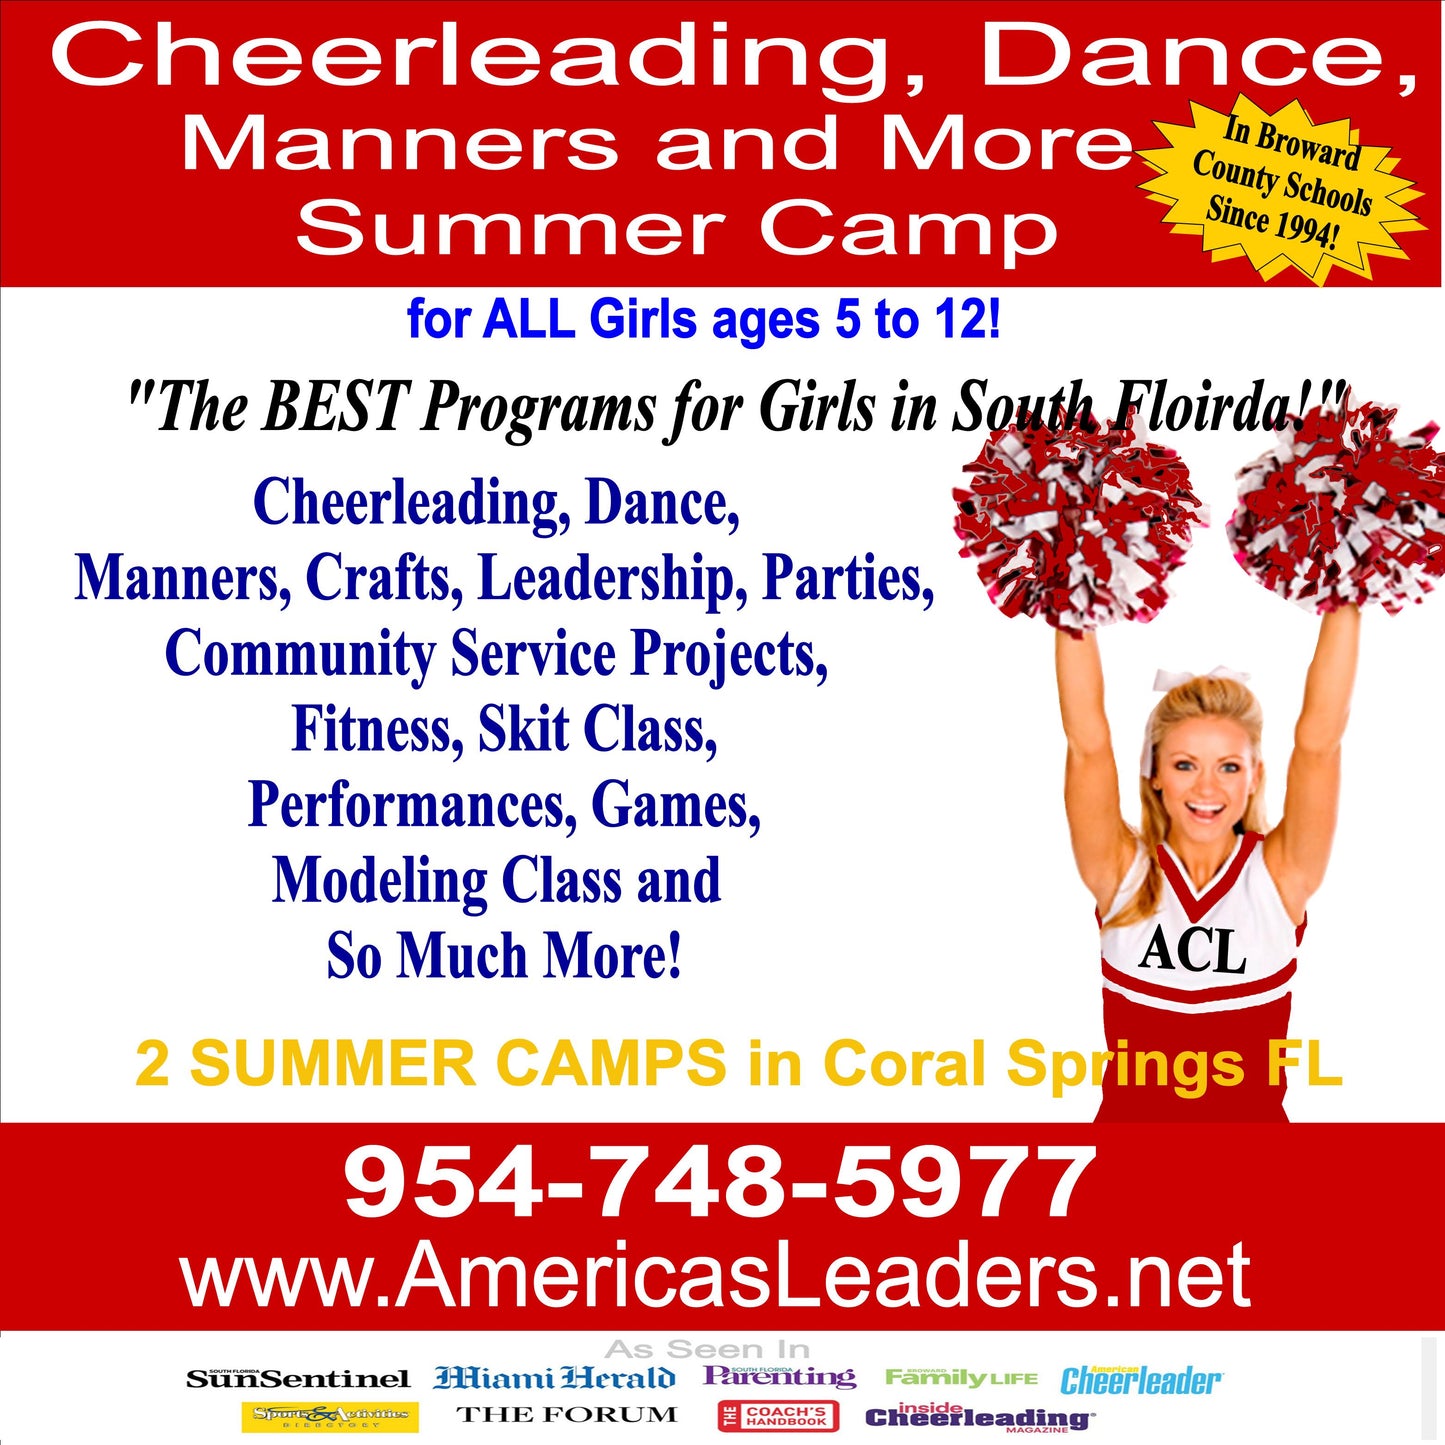 Cheerleading, Dance, Manners and More Summer Camp in Coral Springs Florida